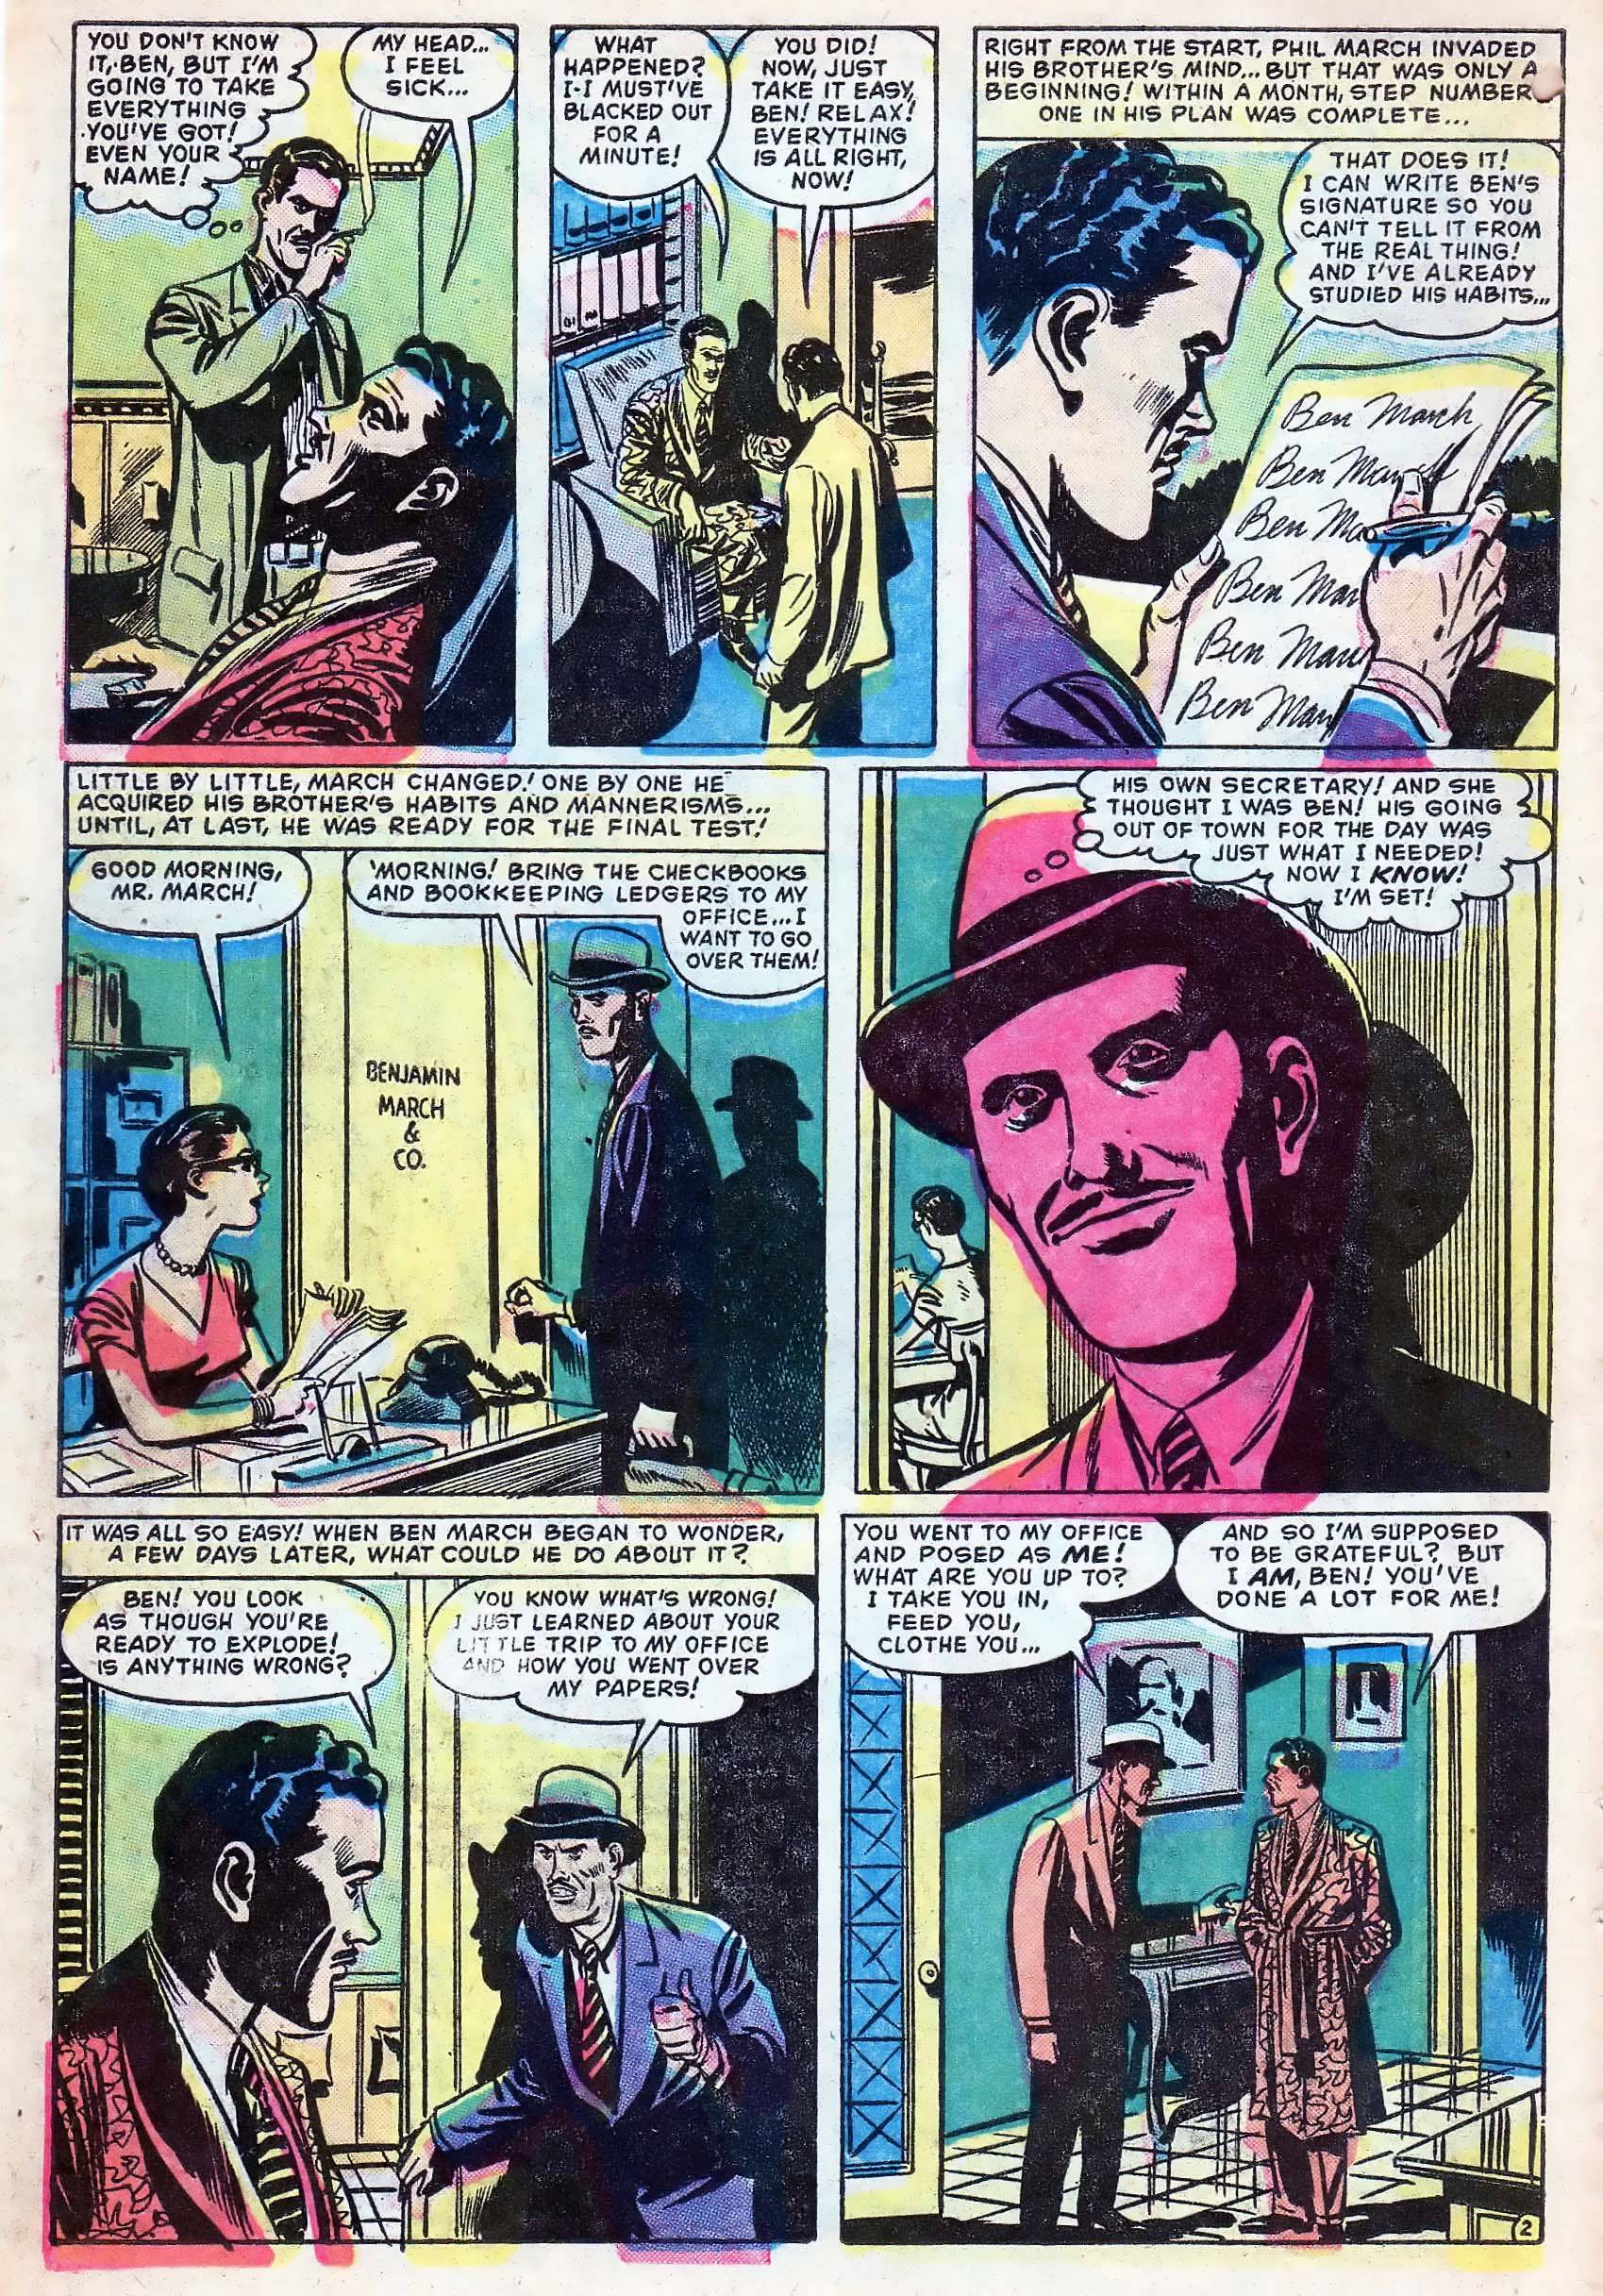 Marvel Tales (1949) 157 Page 13